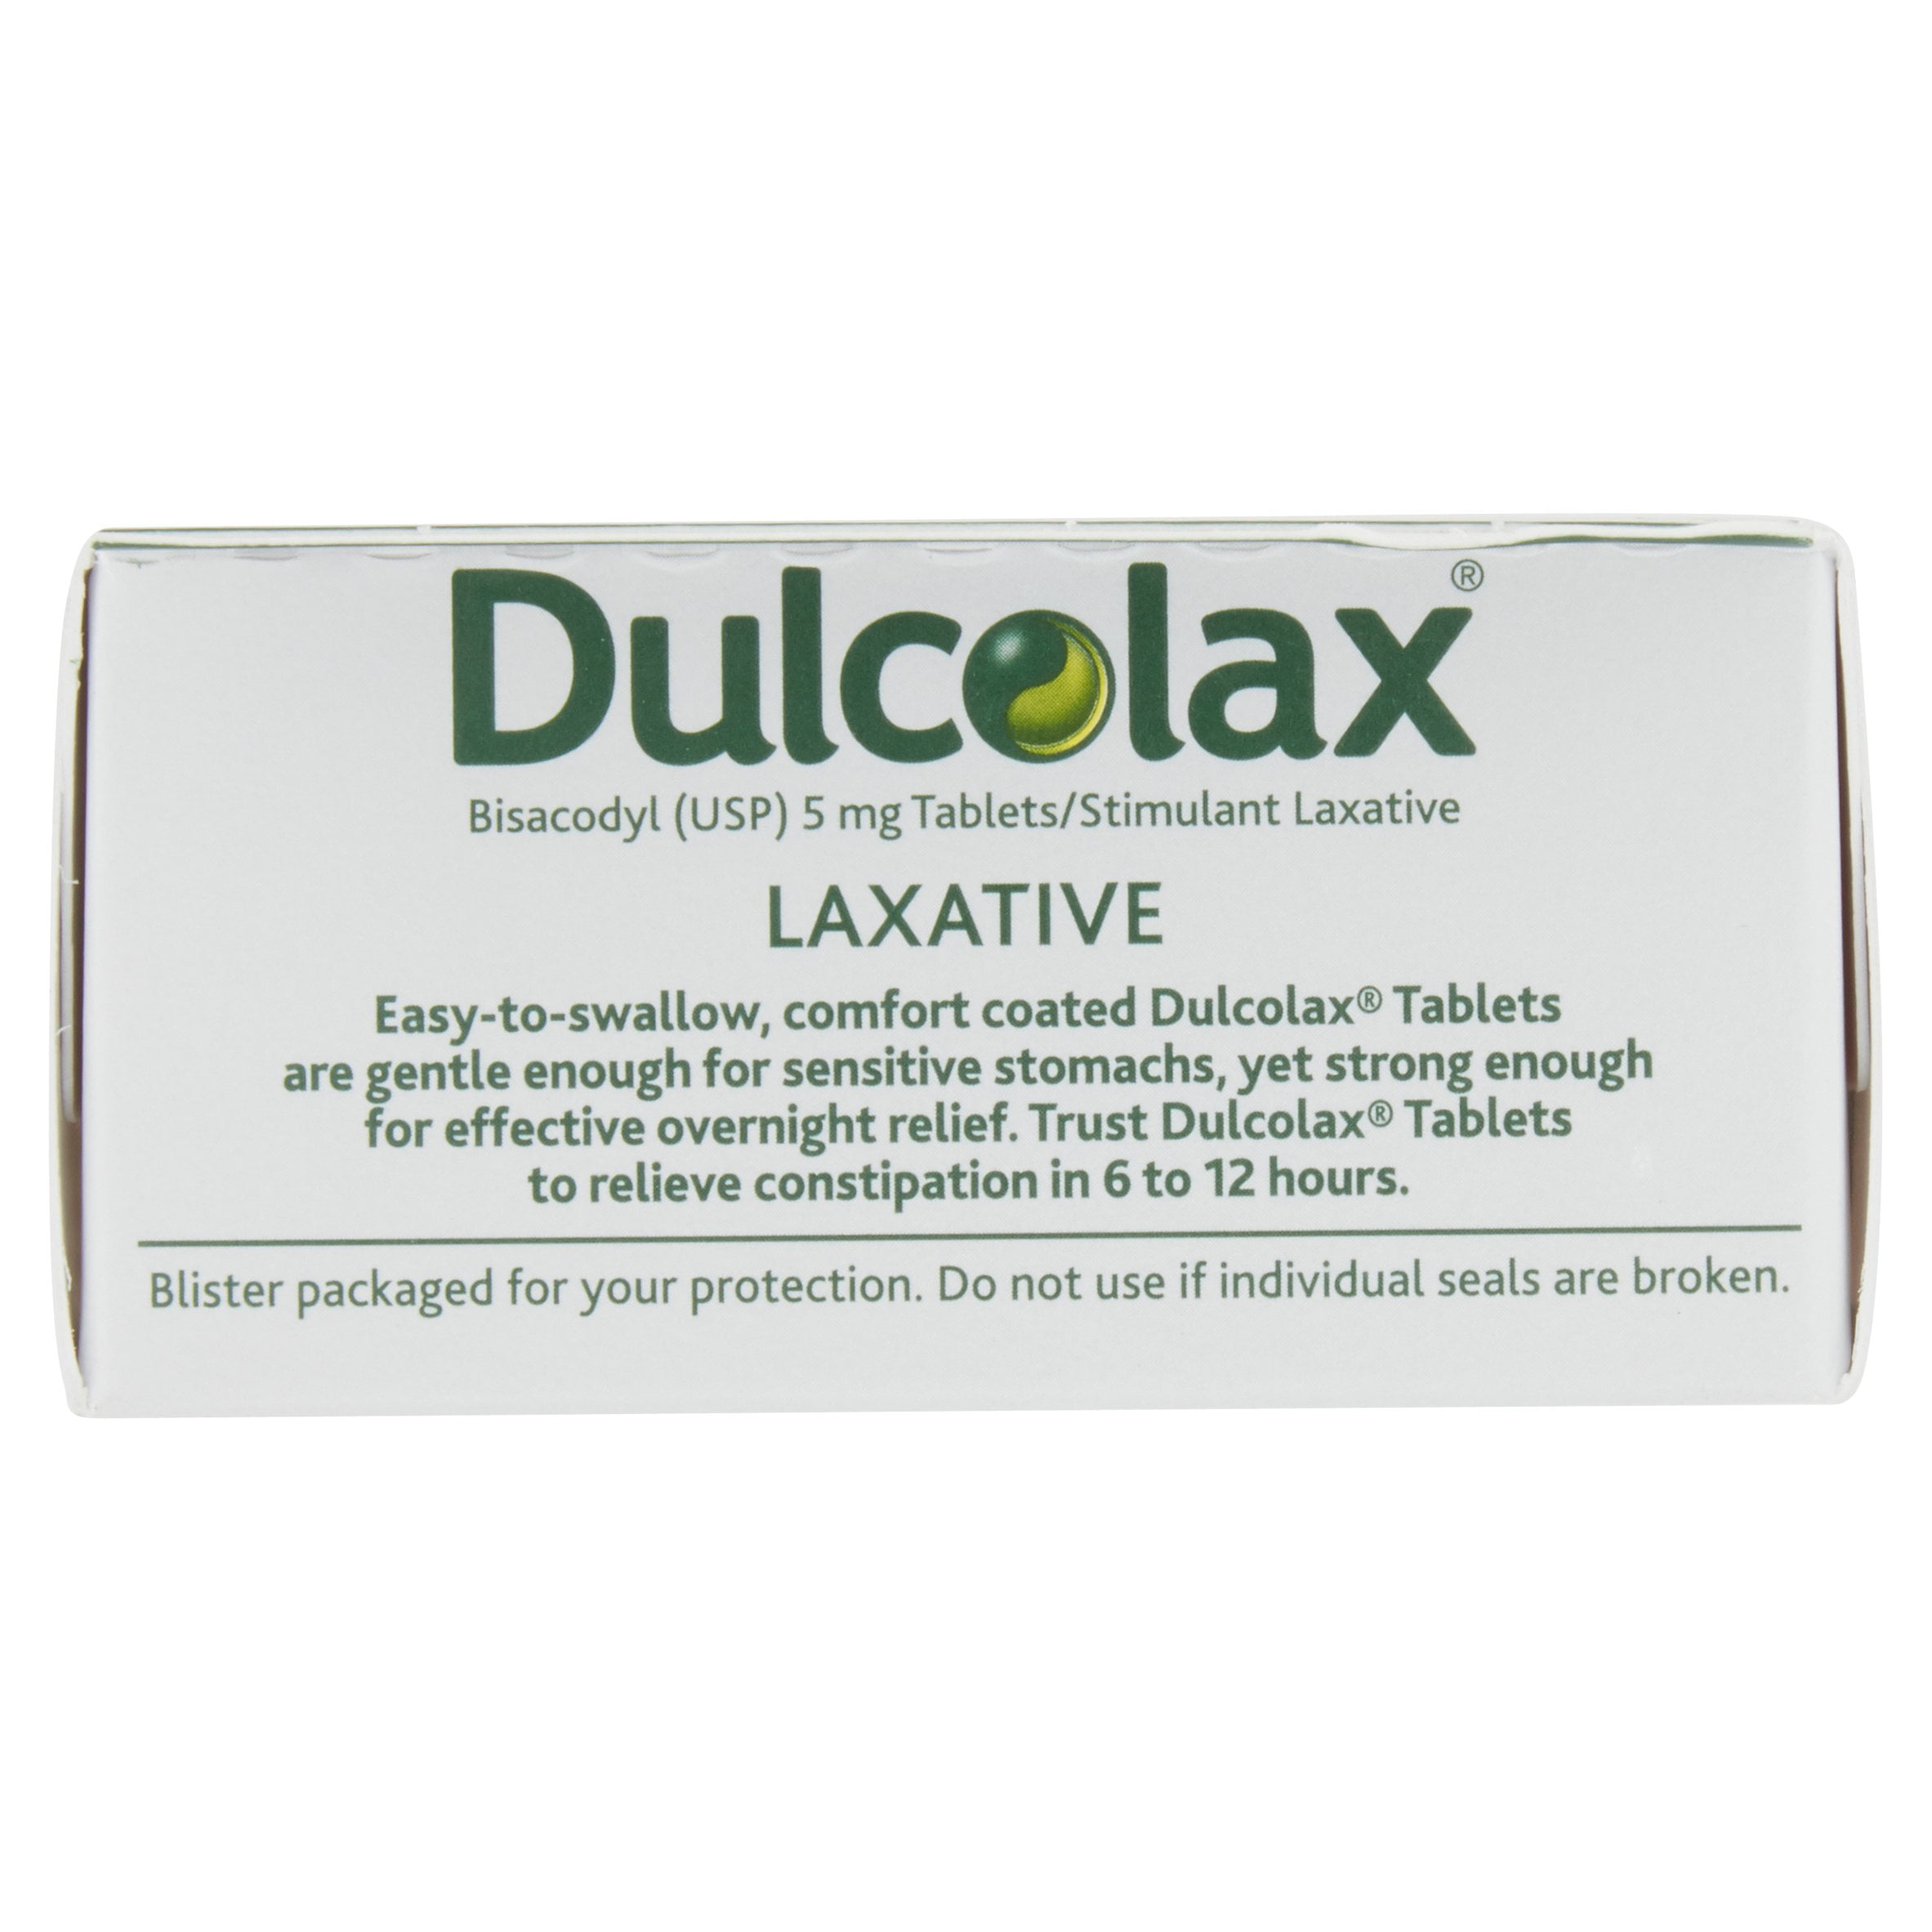 How long does it take for Dulcolax to take effect?